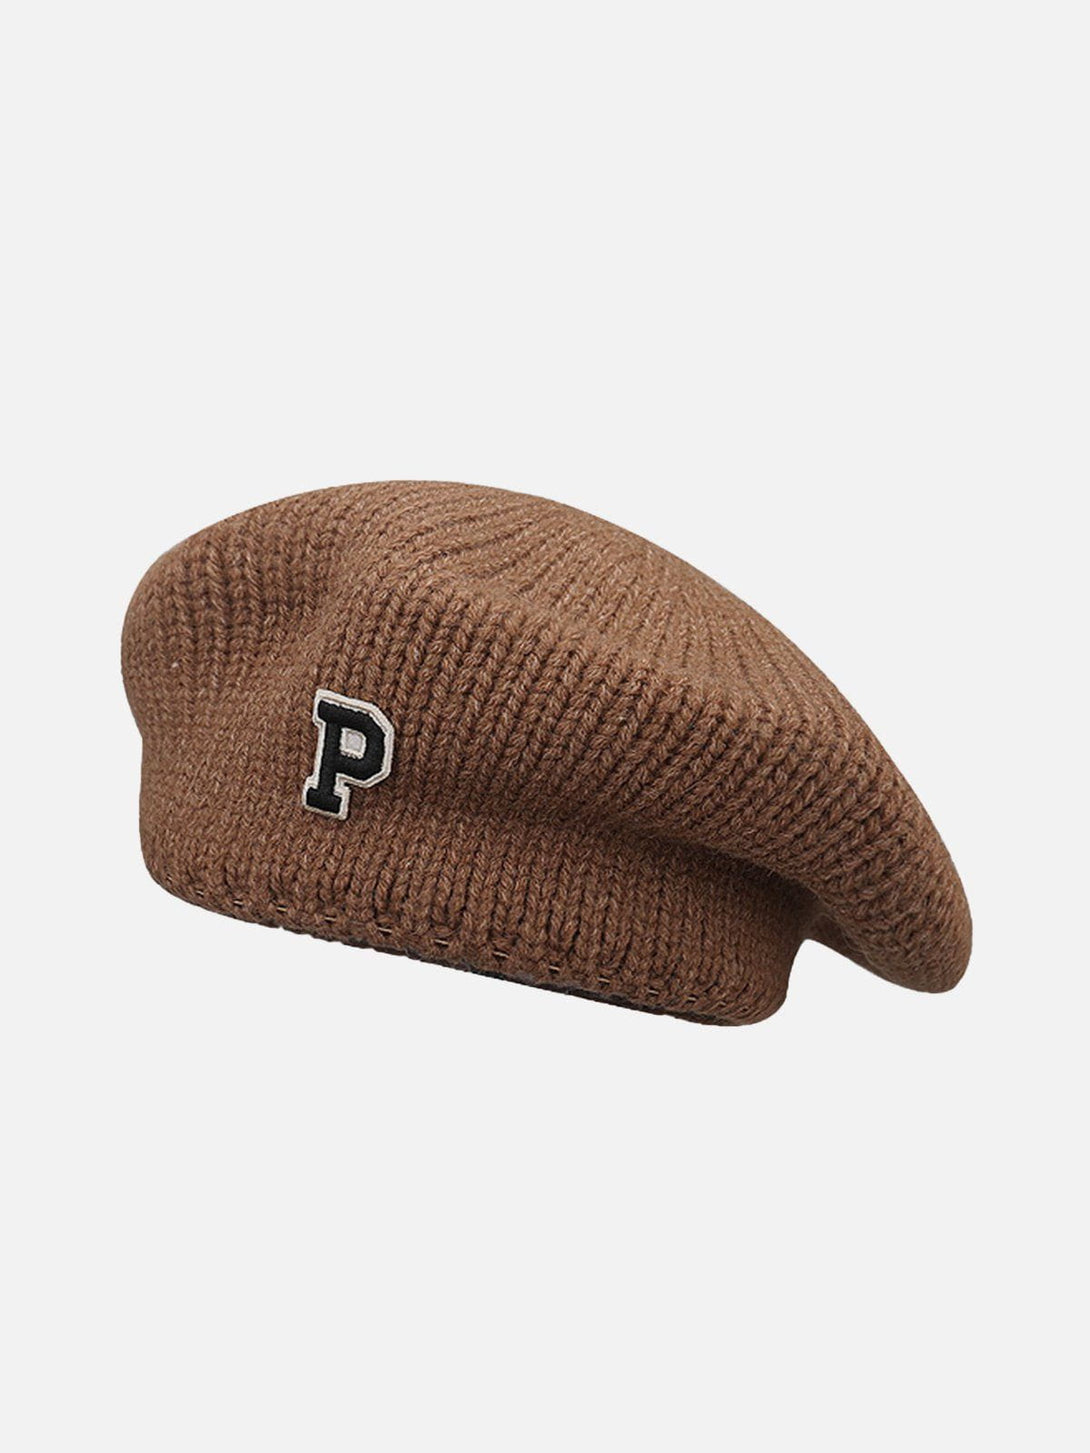 Majesda® - Solid Color Letter Wool Knitted Hat- Outfit Ideas - Streetwear Fashion - majesda.com